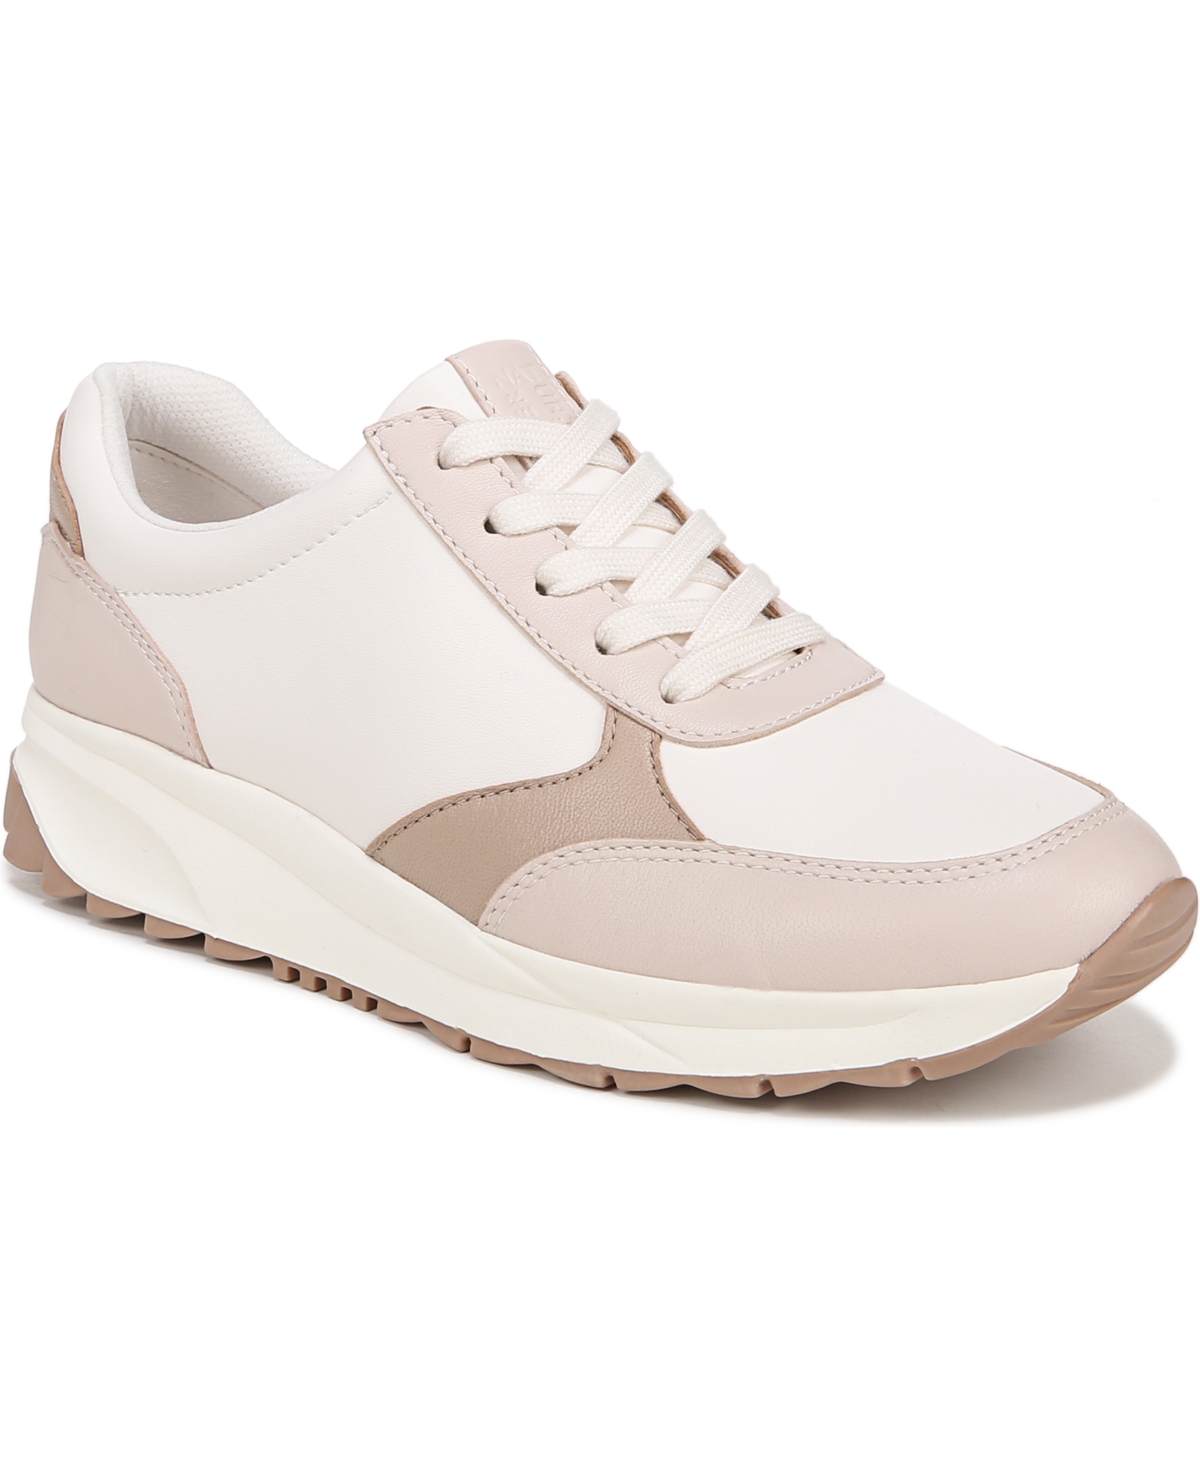 Shay Sneakers - Beige Multi Leather